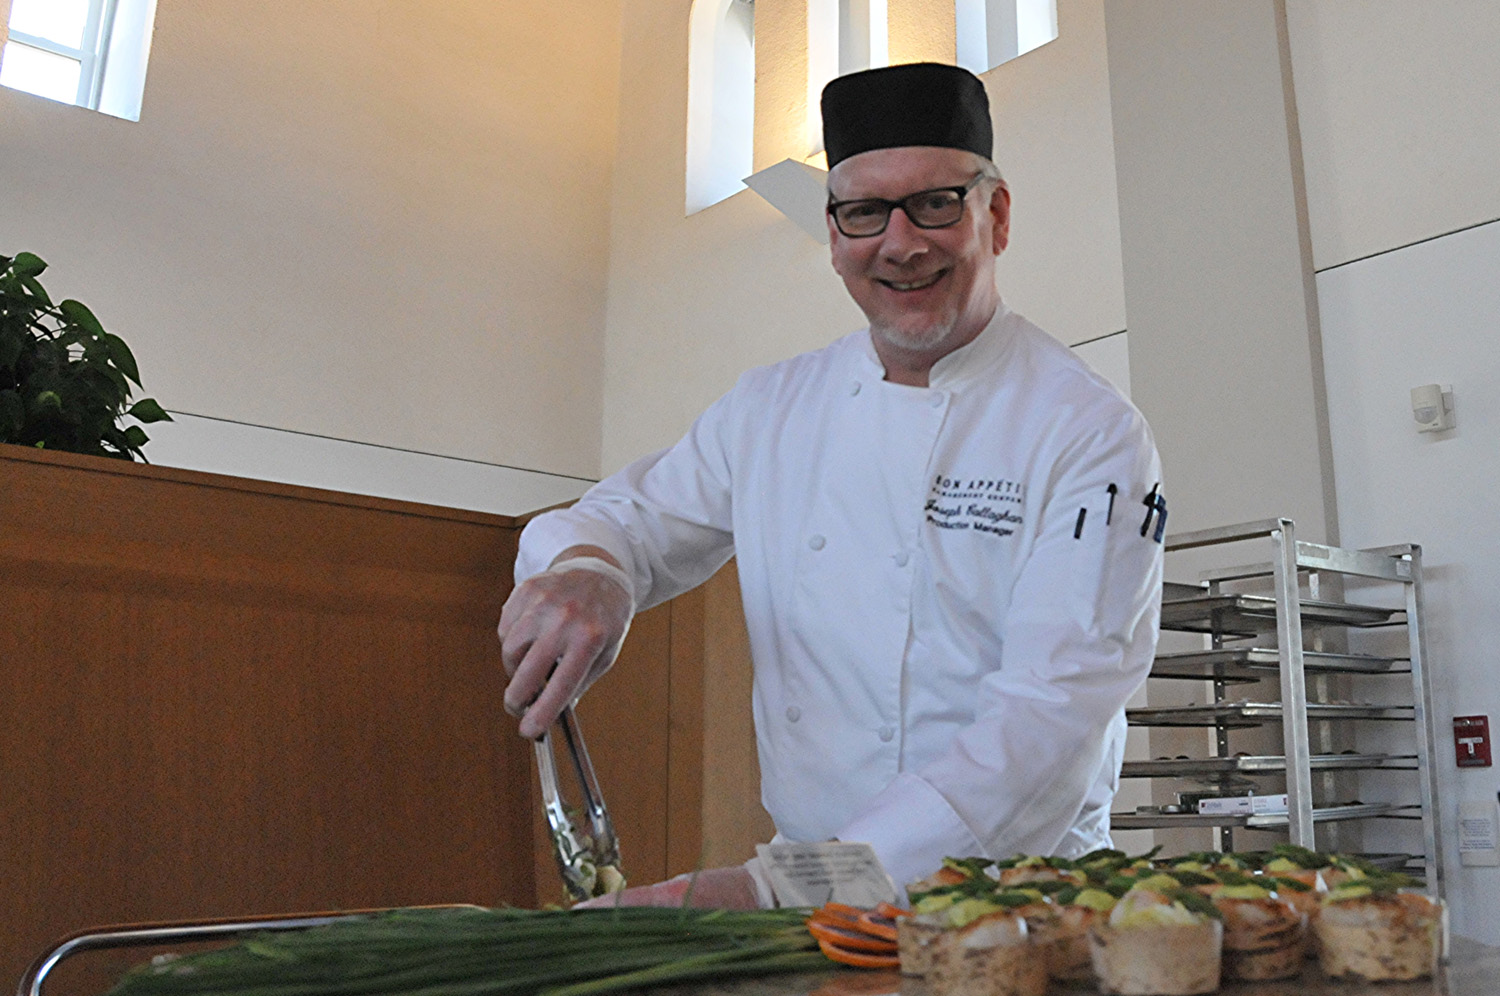 Chef Joseph Callaghan with Bon Appetit served up short rib tacos, pan seared scallops, pastries and more.